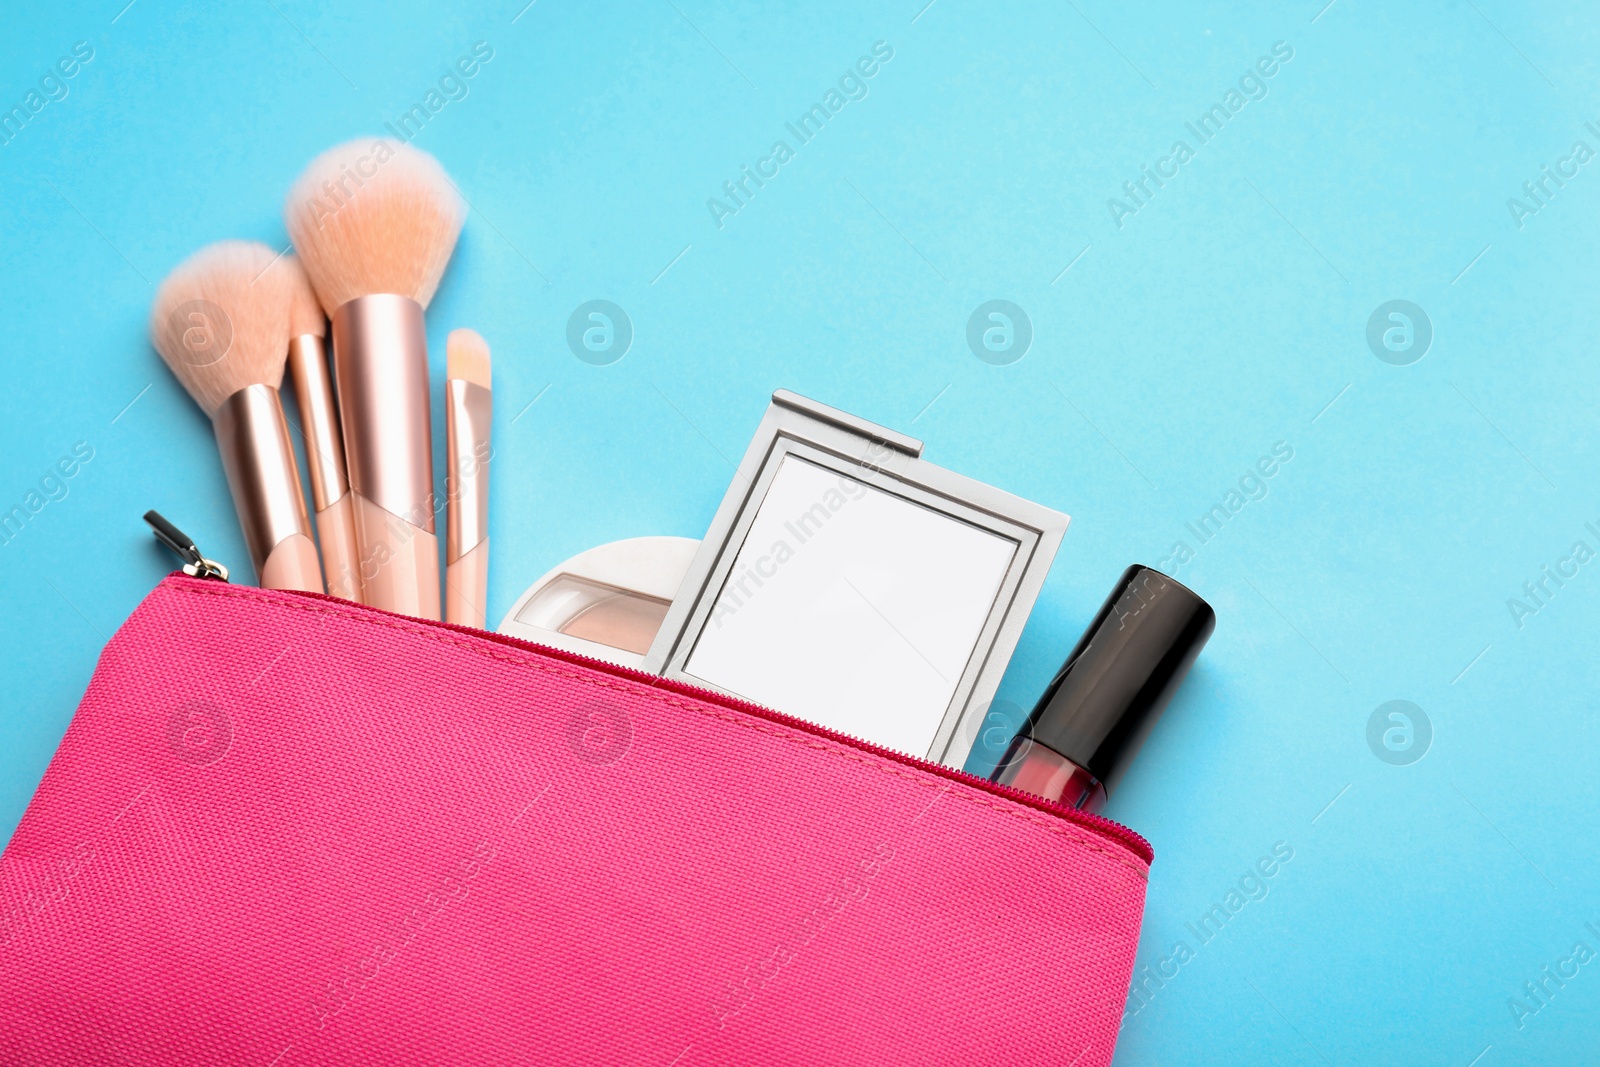 Photo of Cosmetic bag with pocket mirror and makeup products on light blue background, flat lay. Space for text